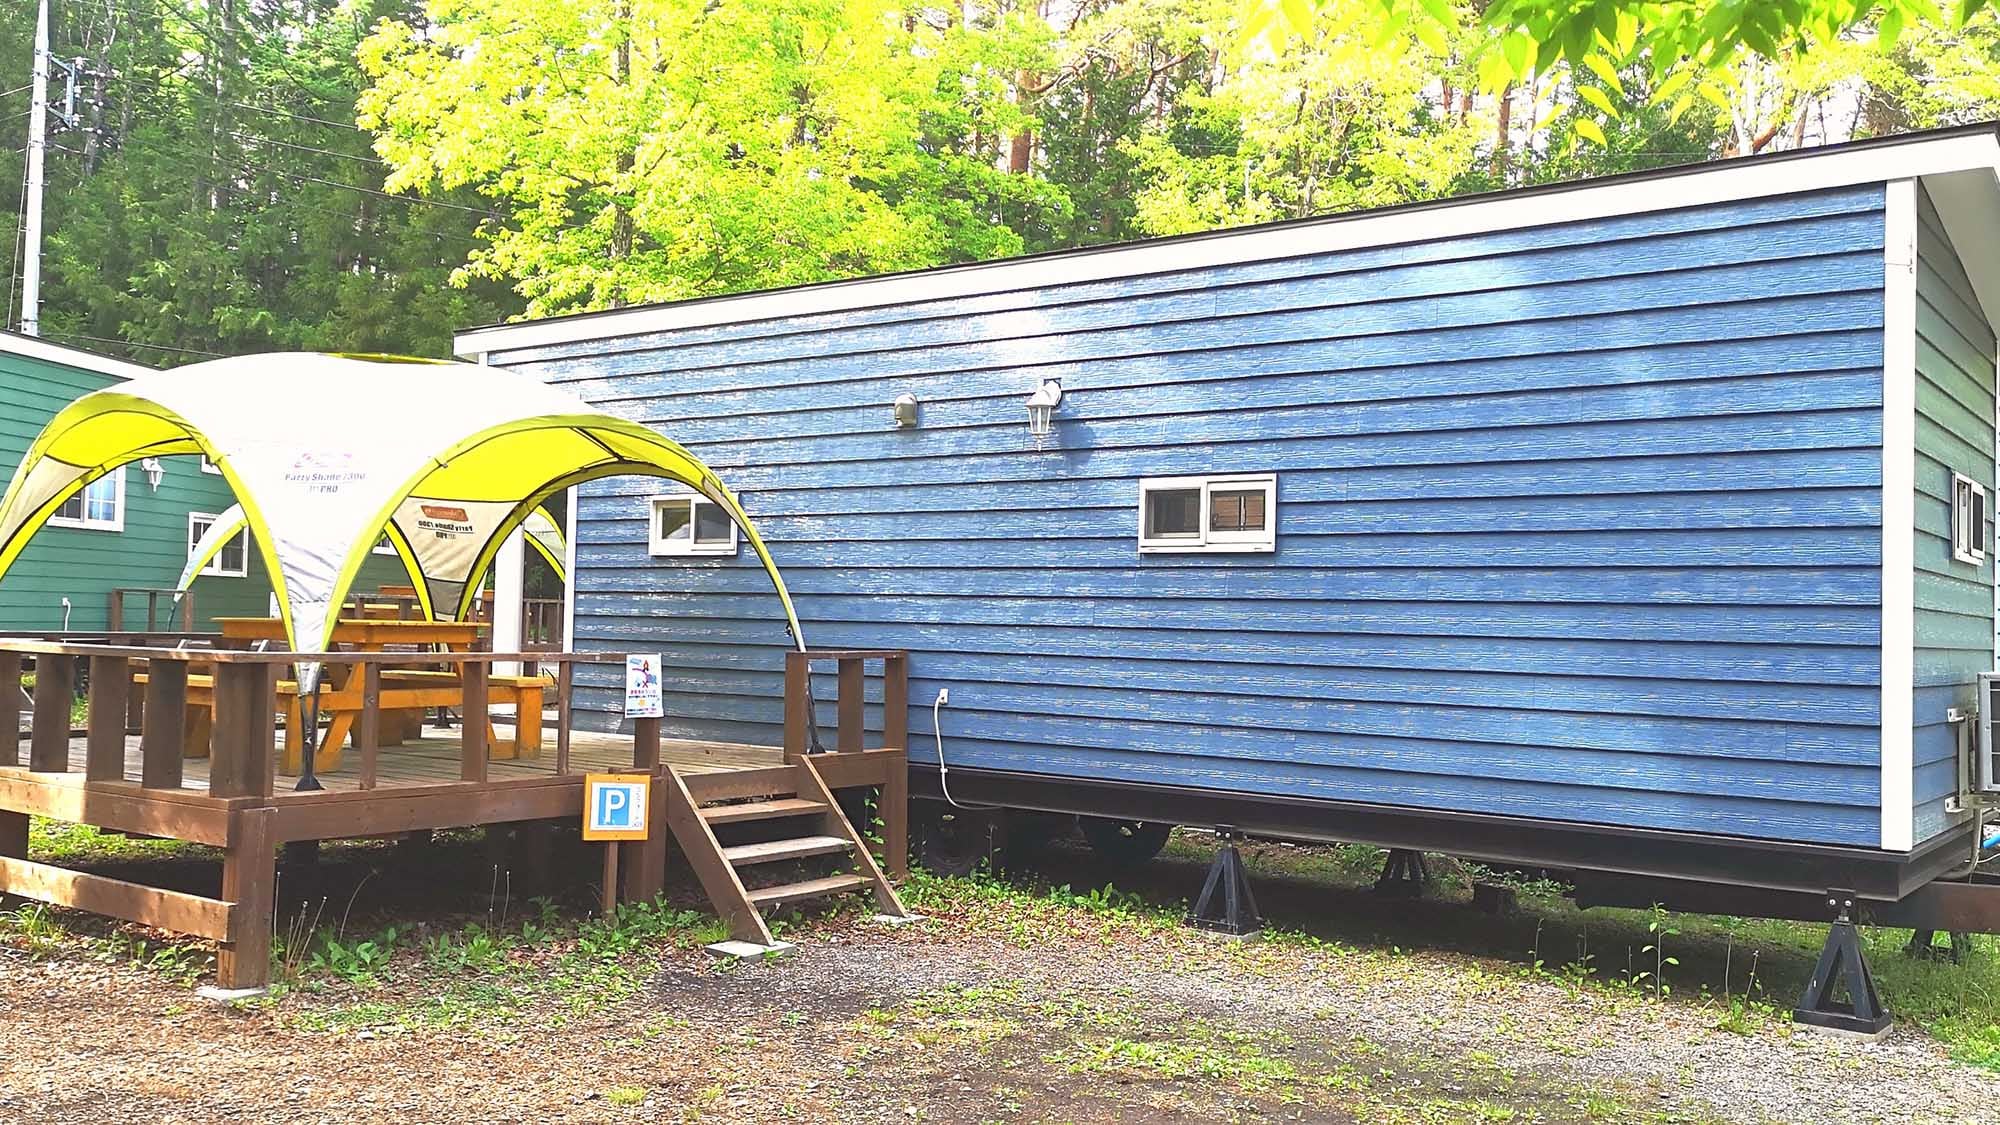 ・ You can enjoy BBQ on the terrace with a tarp of the trailer house "Comfort Cabin".